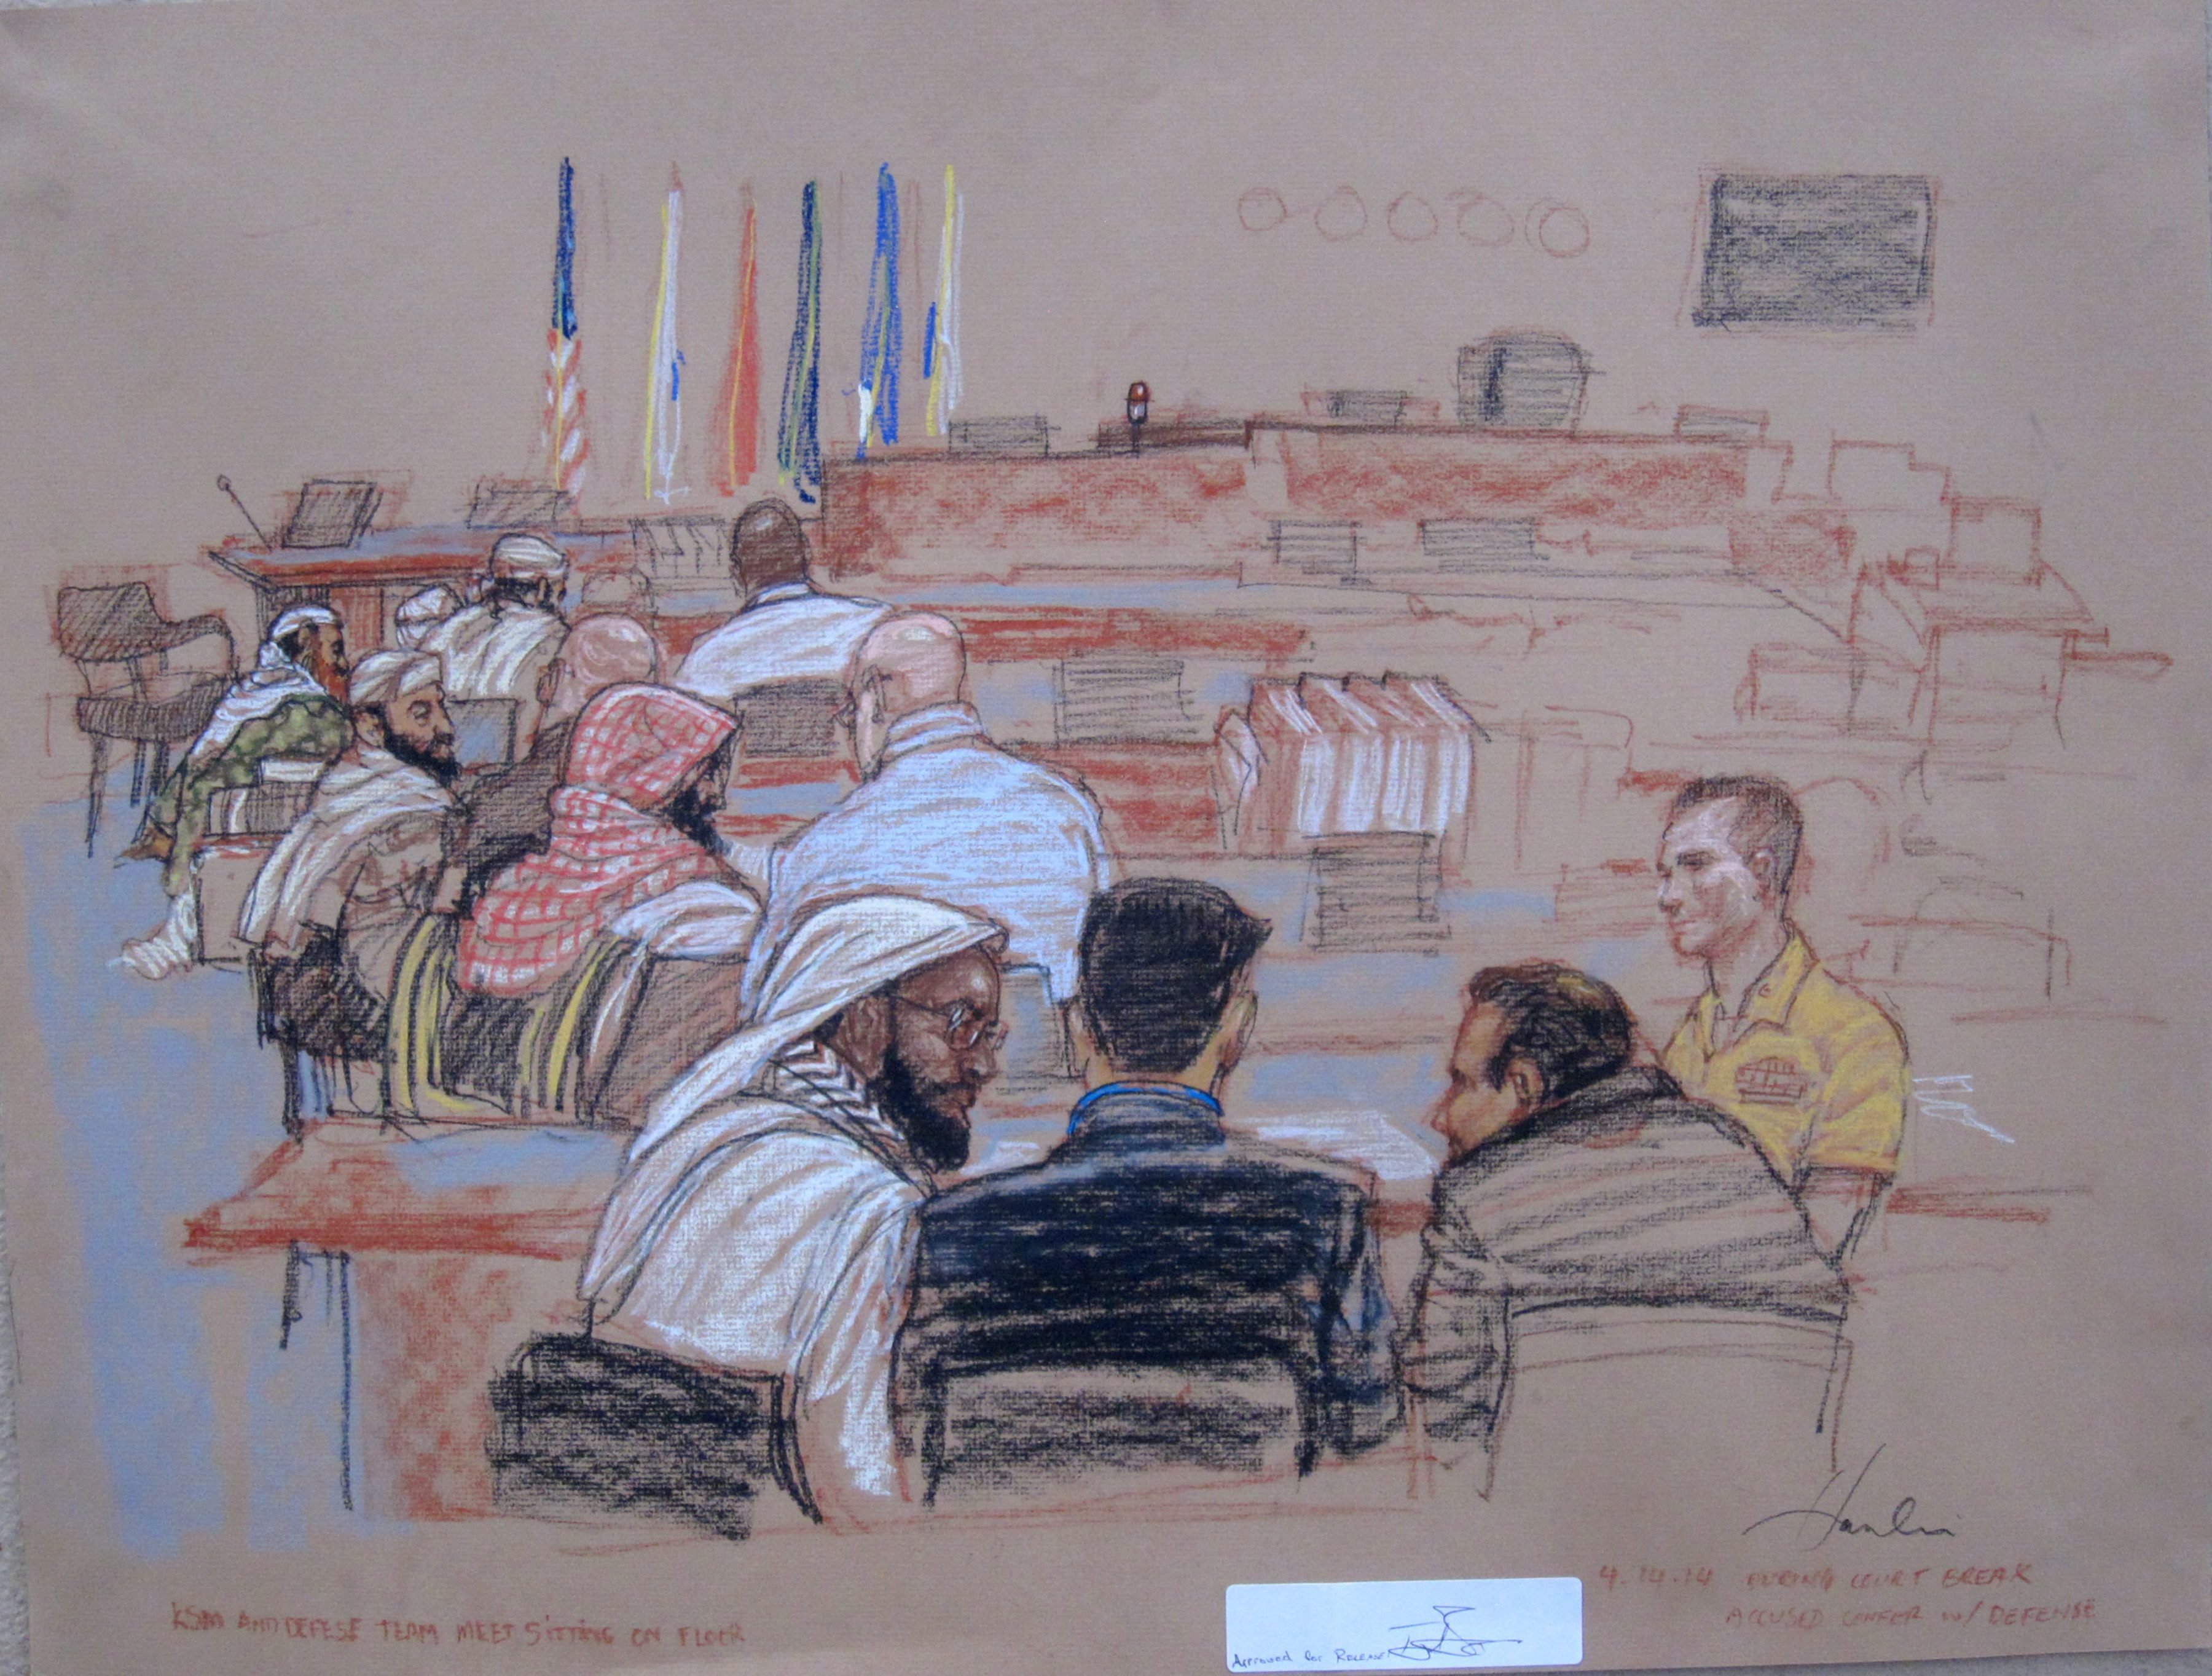 The 9/11 accused confer with their defense lawyers during a break in pretrial hearings at the U.S. Navy base Guantanamo Bay, Cuba, on April 14, 2014.